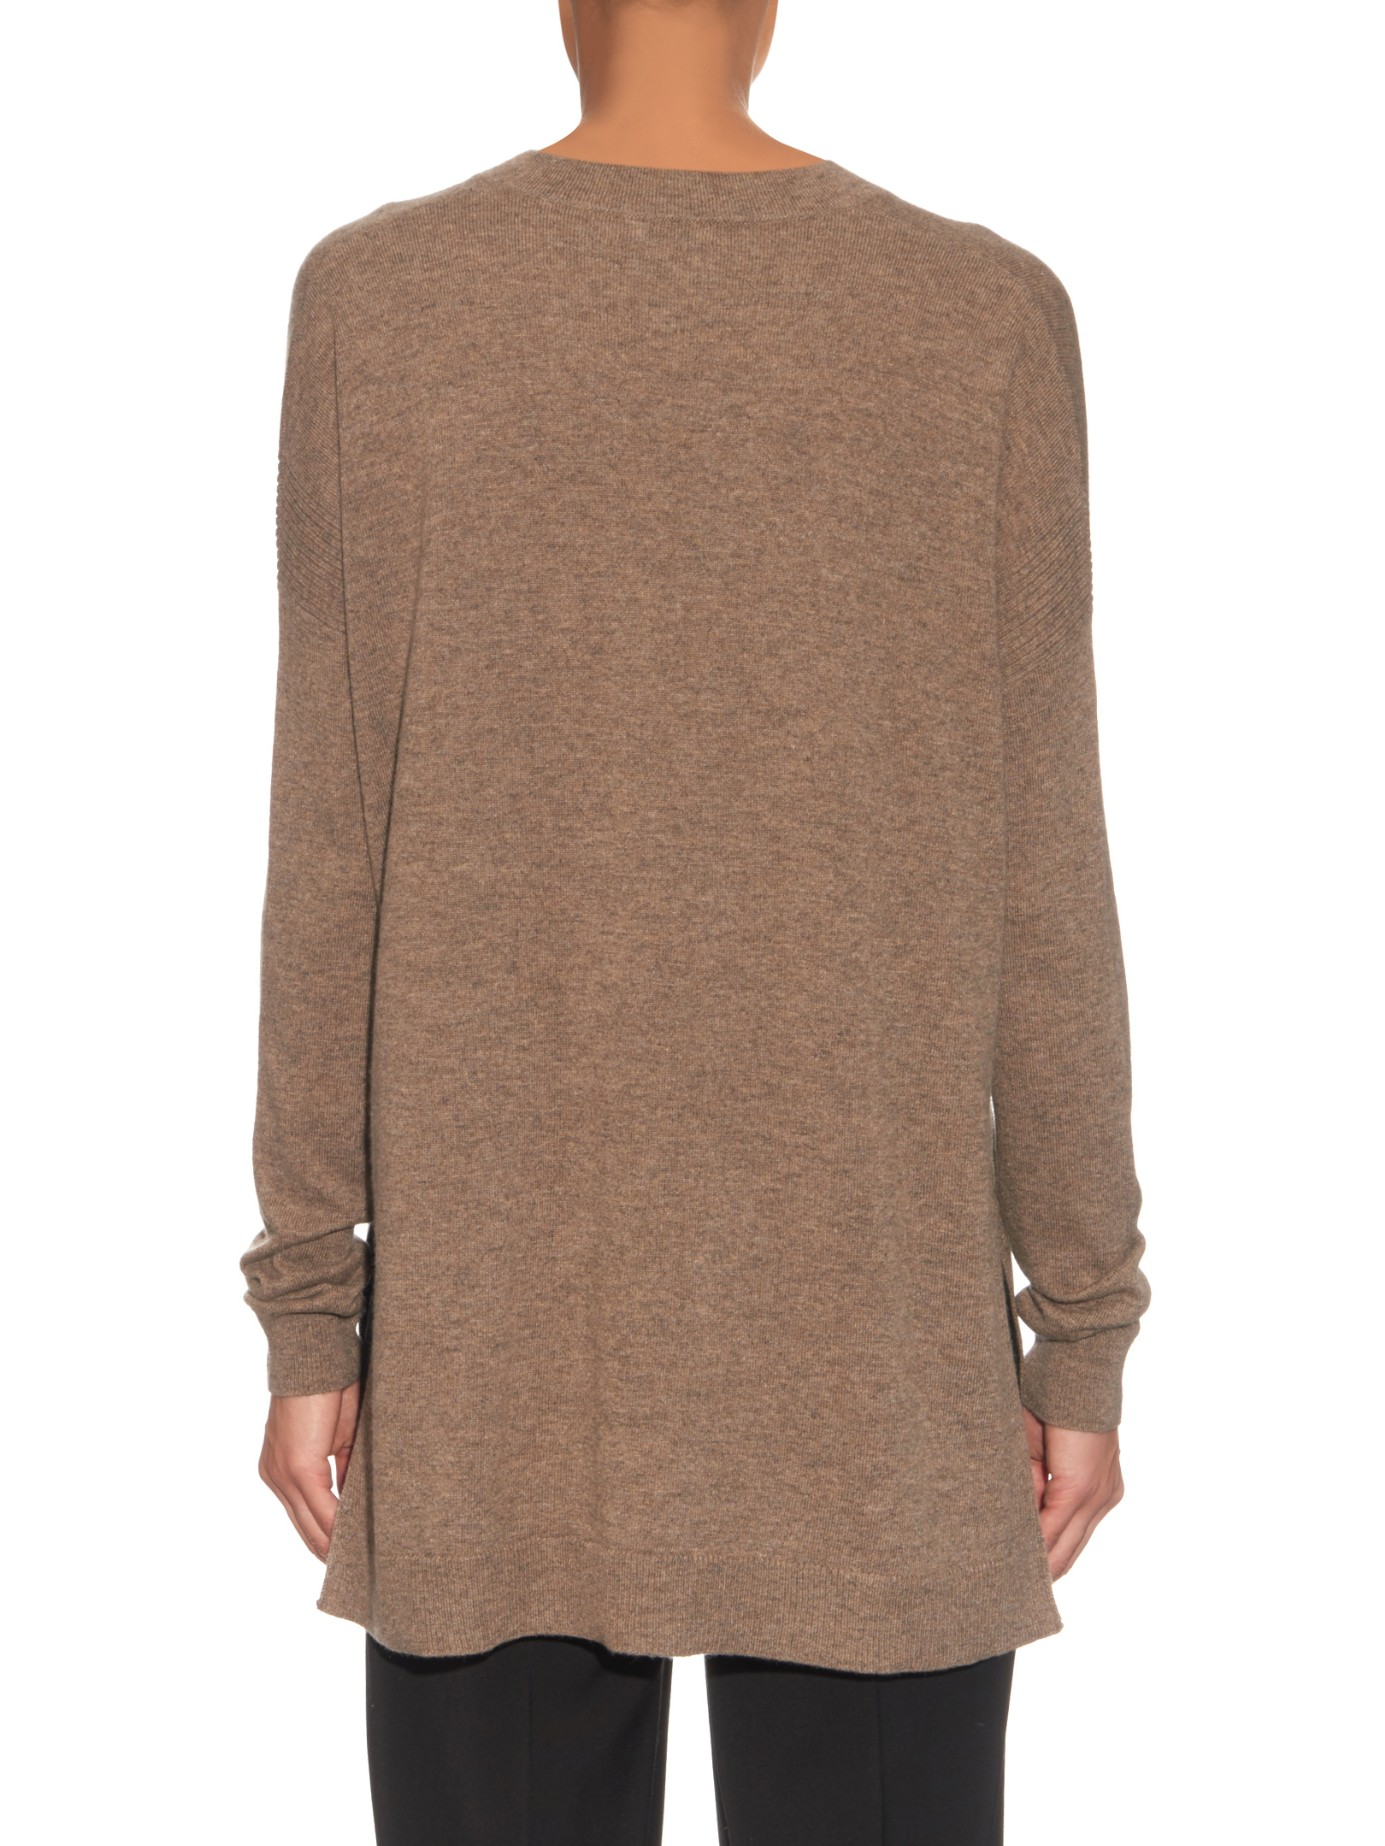 Lyst - Vince V-neck Ribbed-knit Cashmere Sweater in Brown